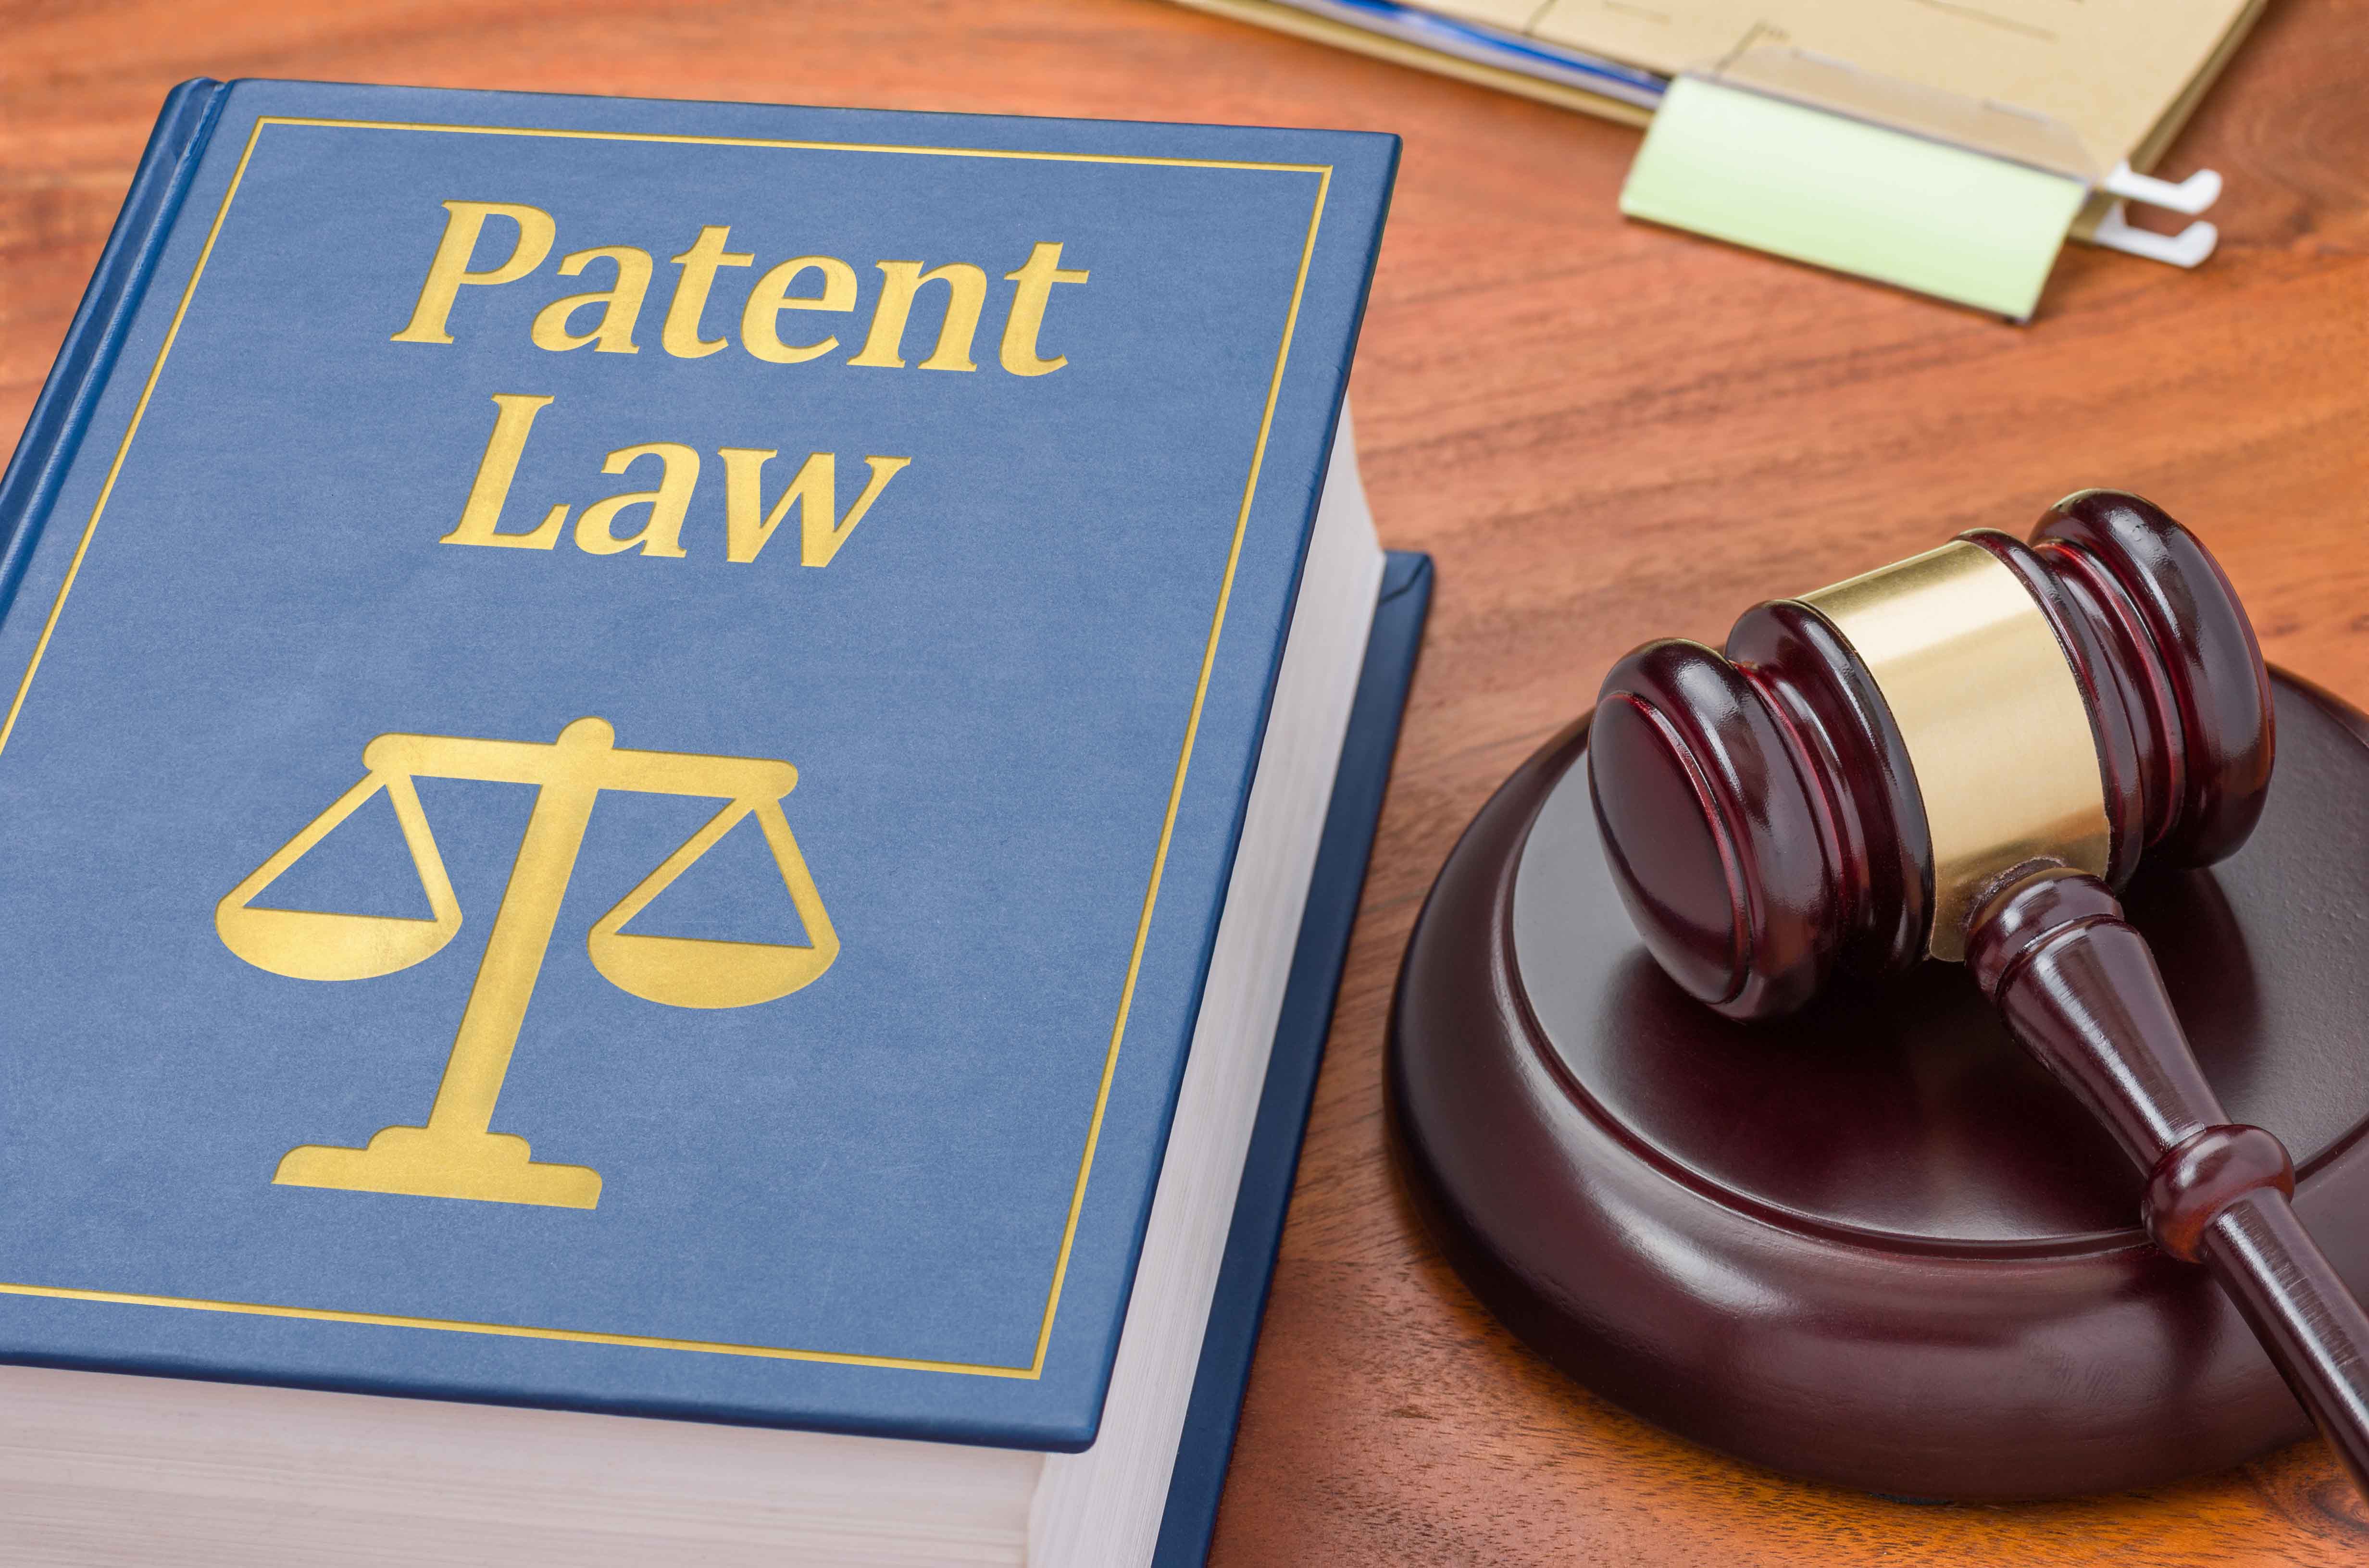 provisional patent cost, how much does a provisional patent cost